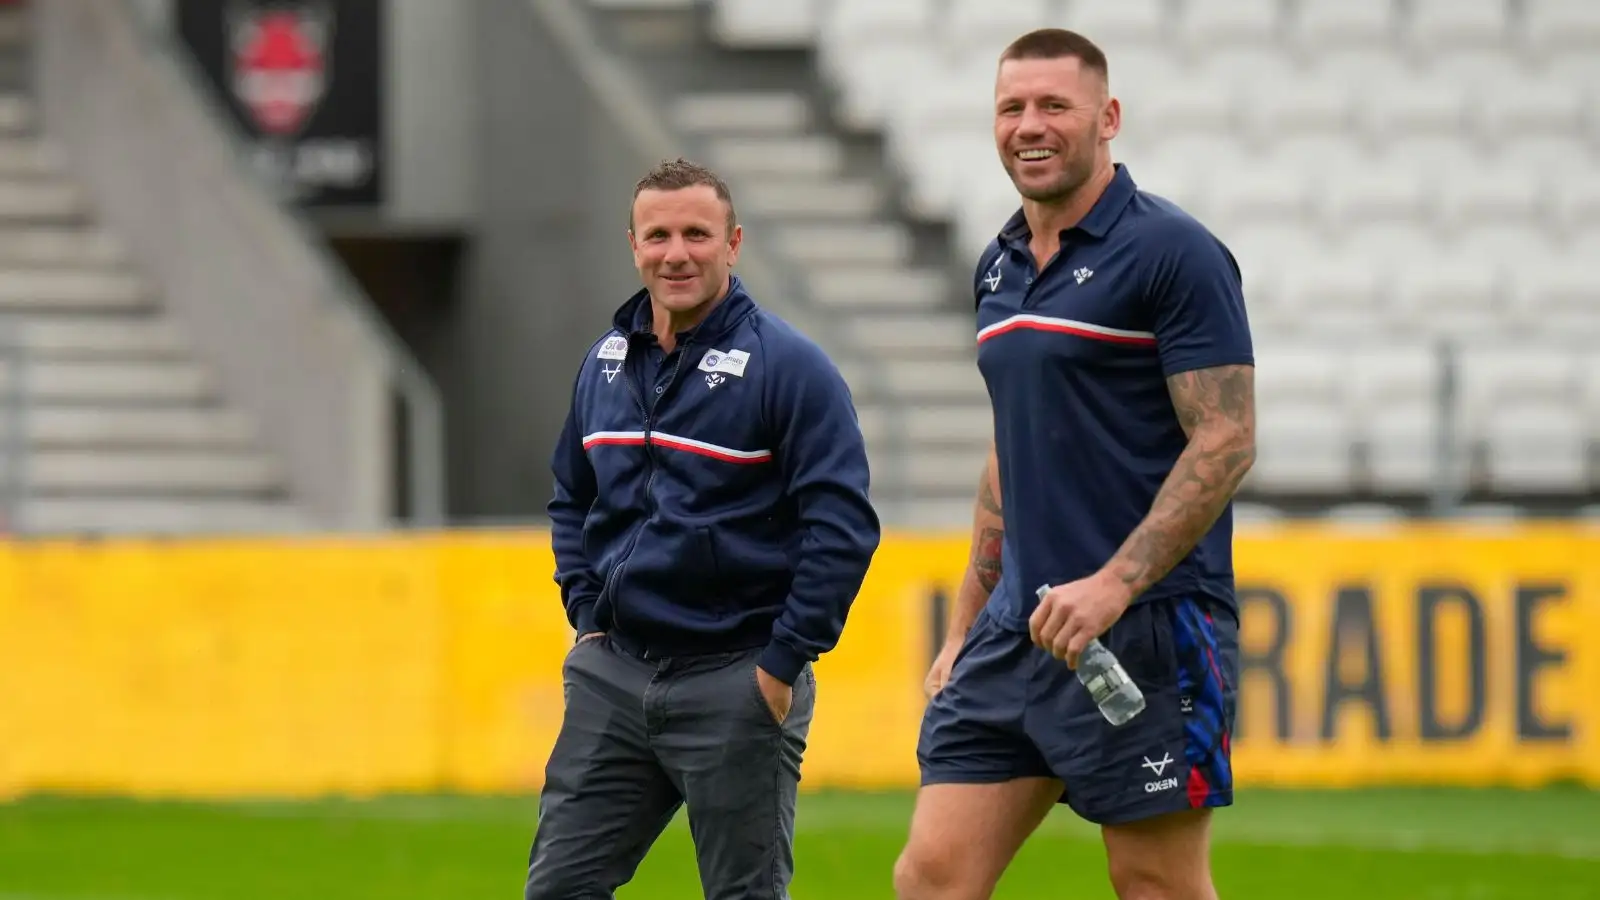 Hull KR boss hails retiring Shaun Kenny-Dowall: ‘Going to go down as one of the best overseas signings’